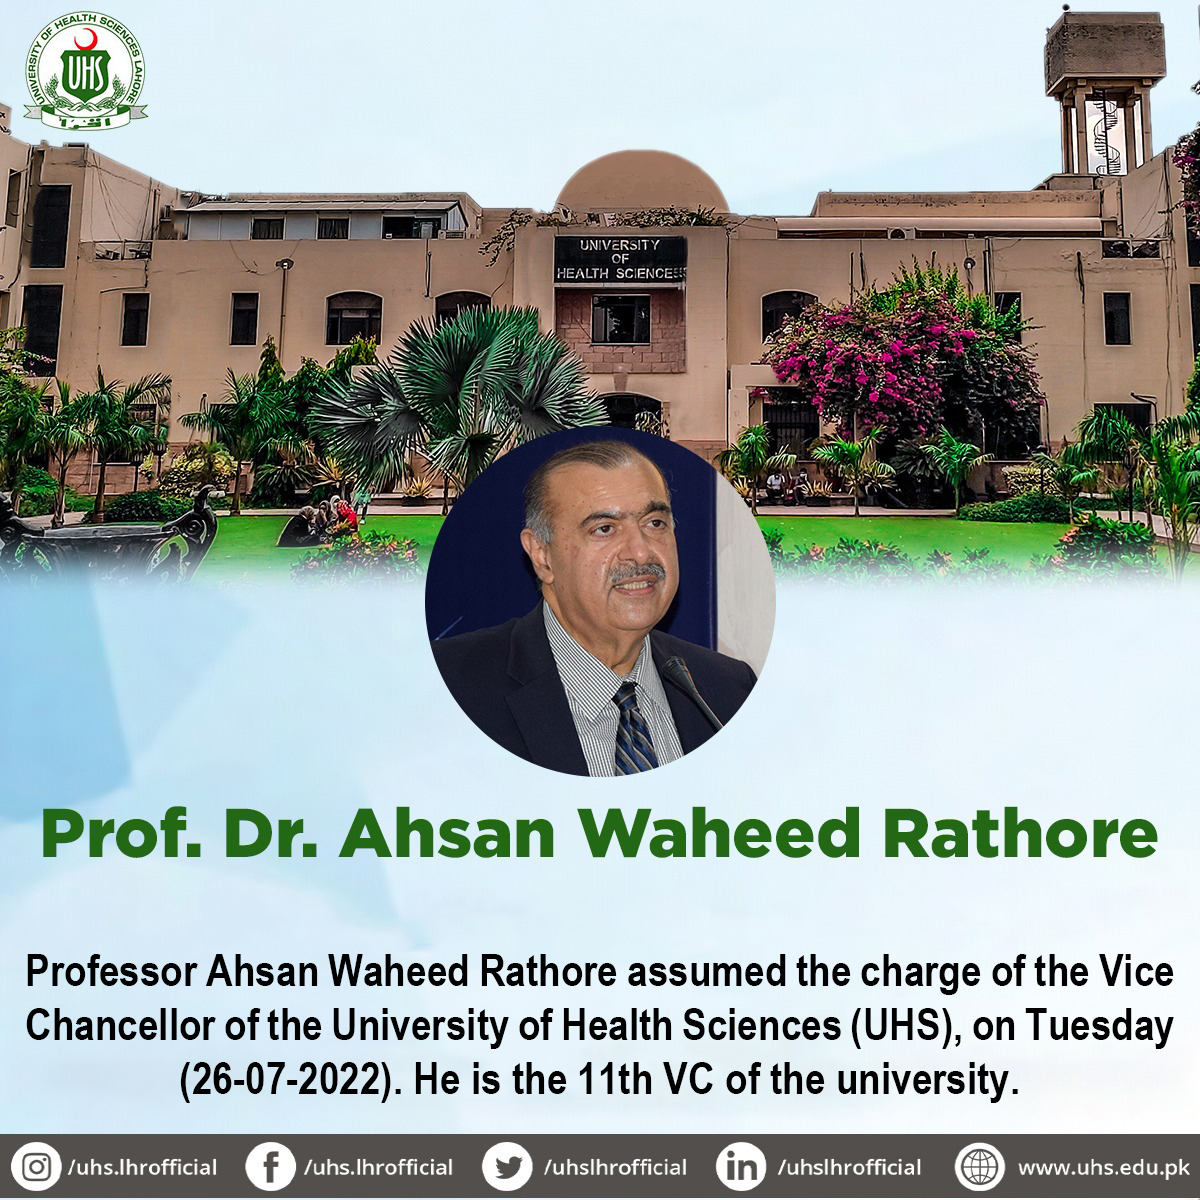 UHS, MDCAT, entry test rest, mdcat result, PMC result, medical dental admissions 2022, mbbs merit list 2022-23, professor Ahsan Waheed Rathore, vc uhs